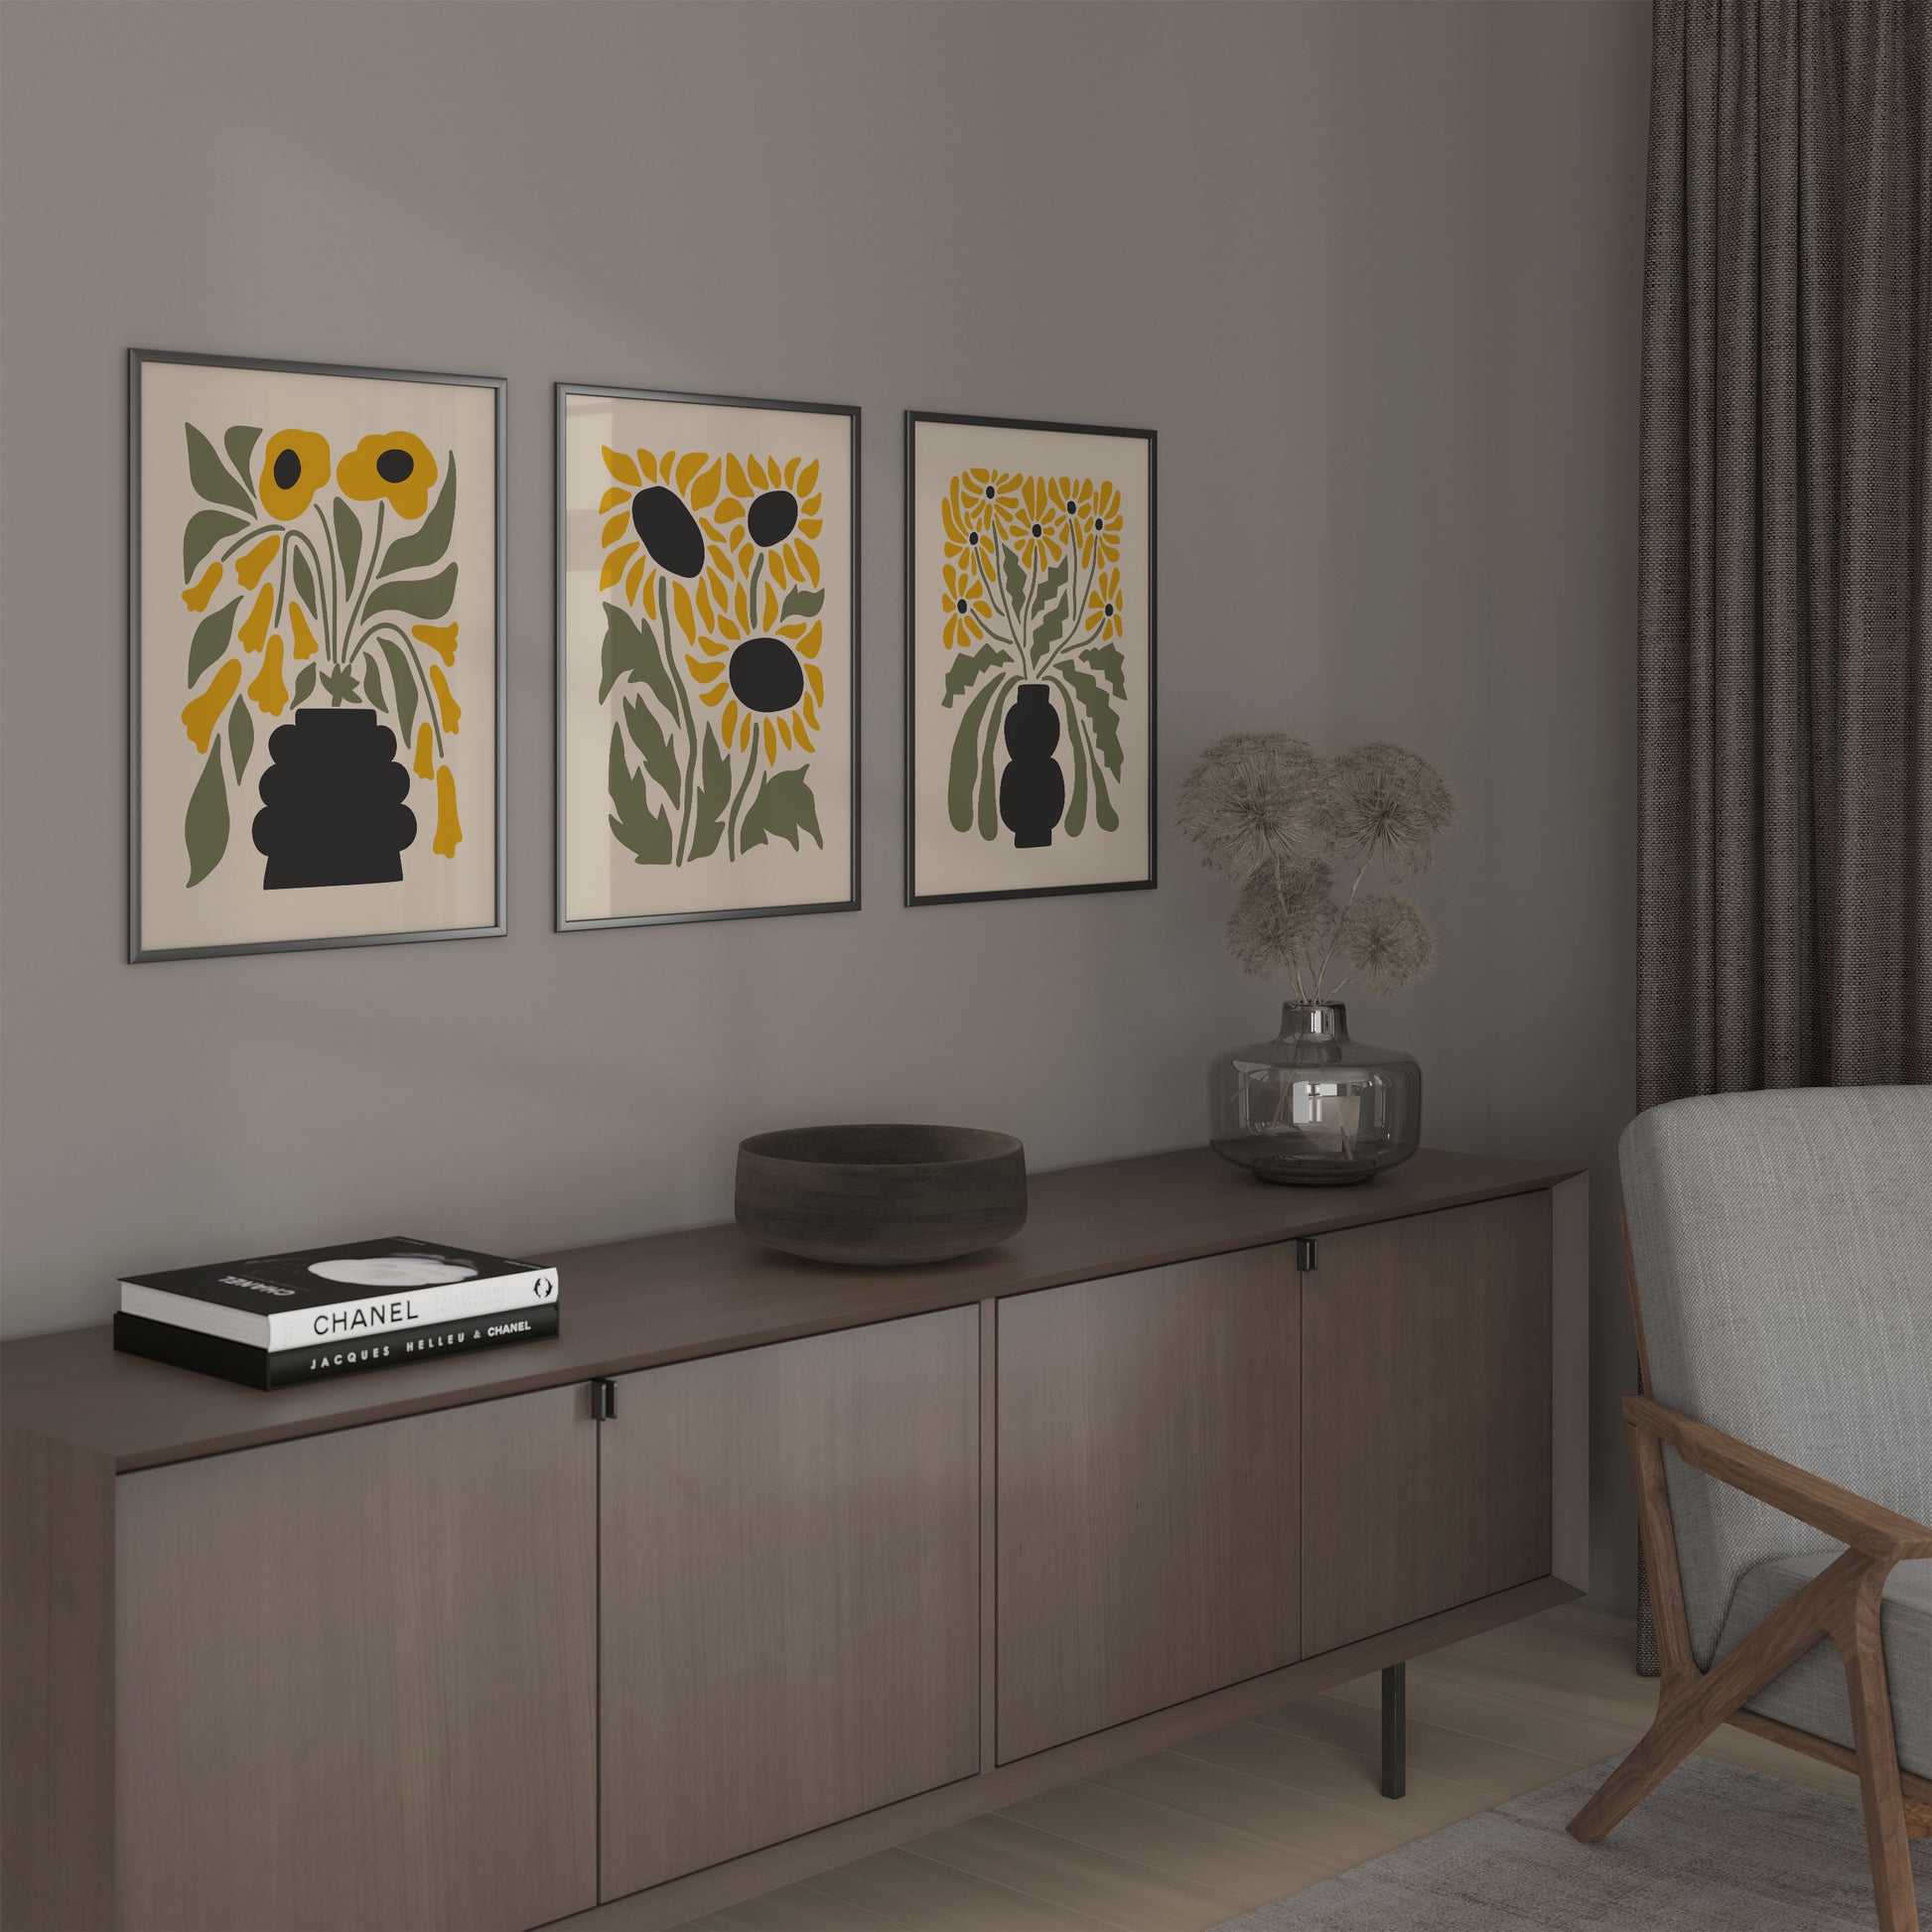 Mid century modern style flower wall art prints, in yellow and green